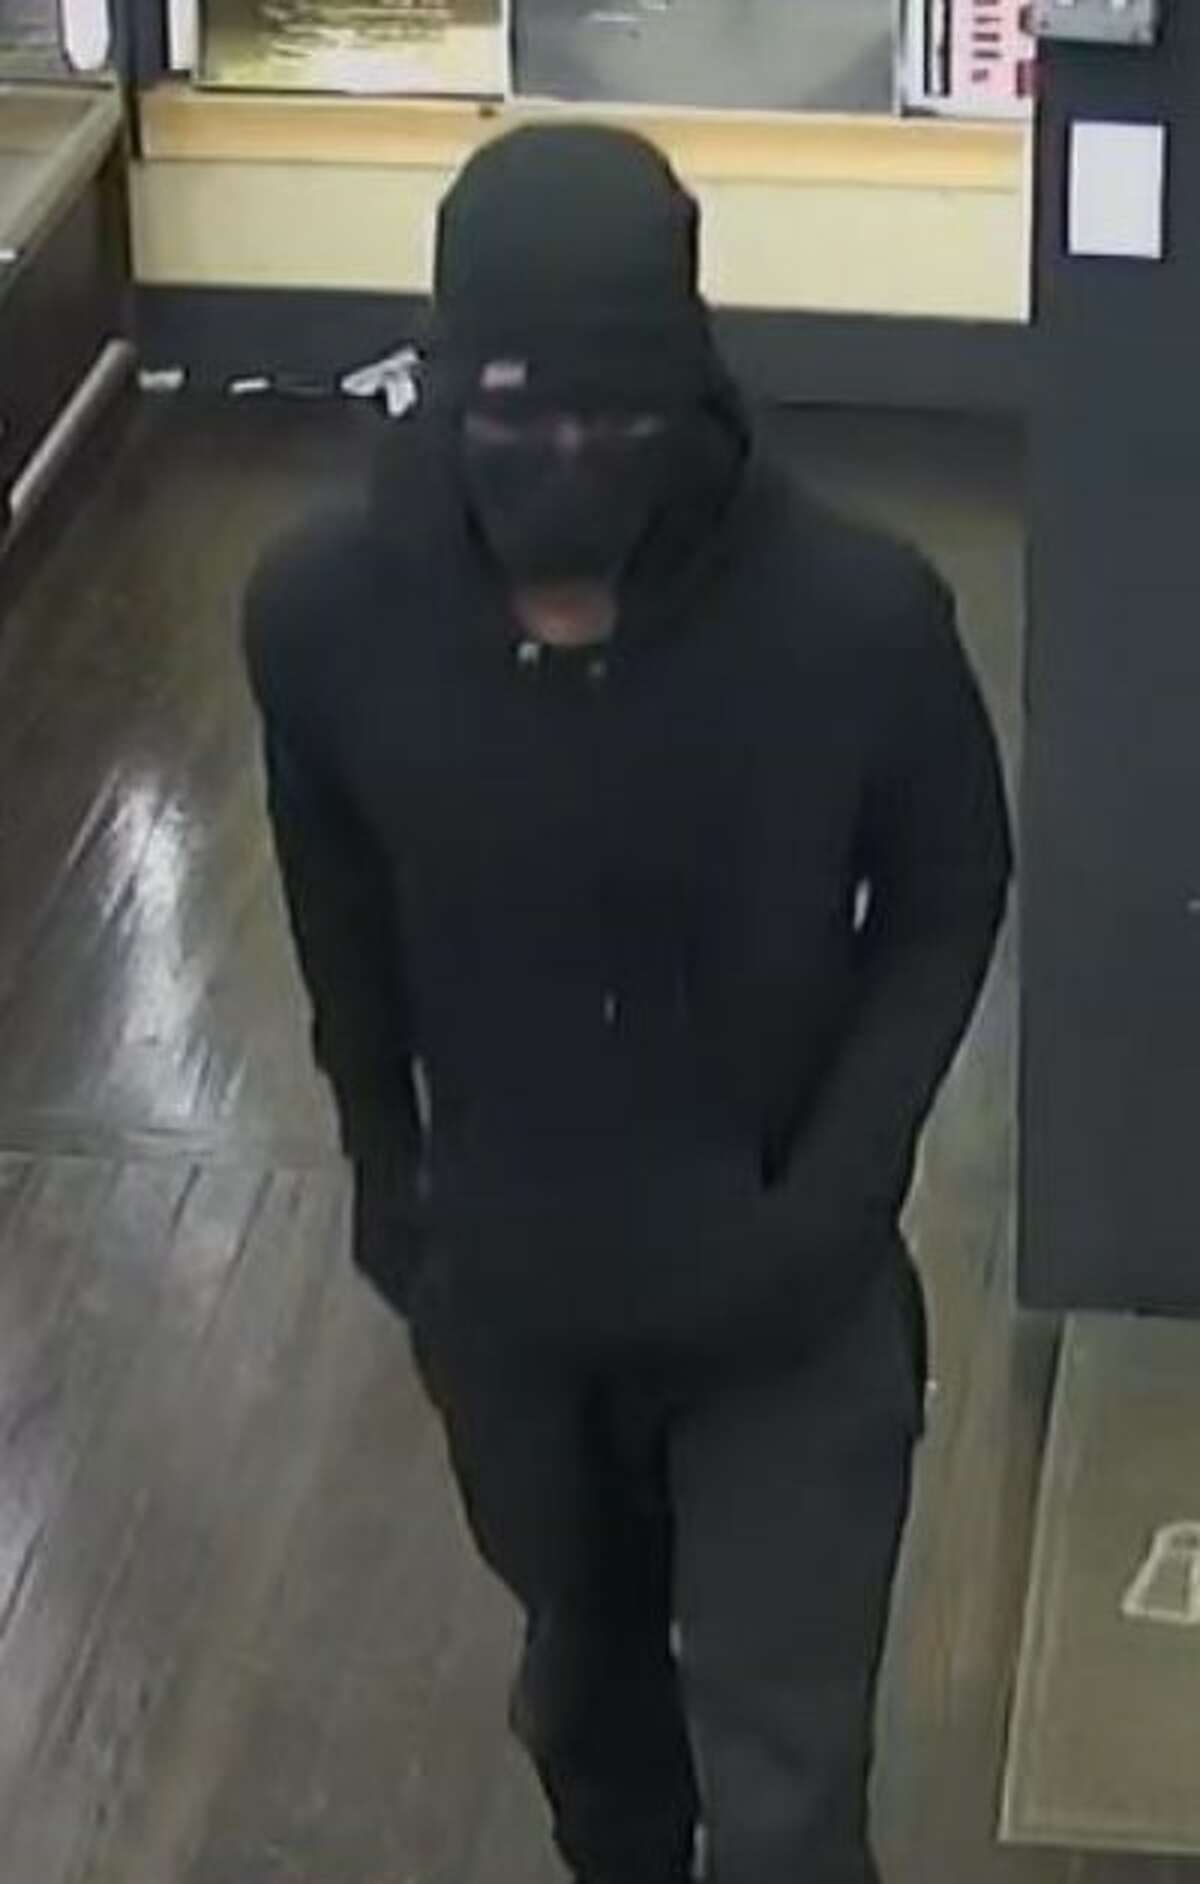 One of the suspects who Norwalk police say robbed a Liberty Square business at gunpoint on Nov. 8.